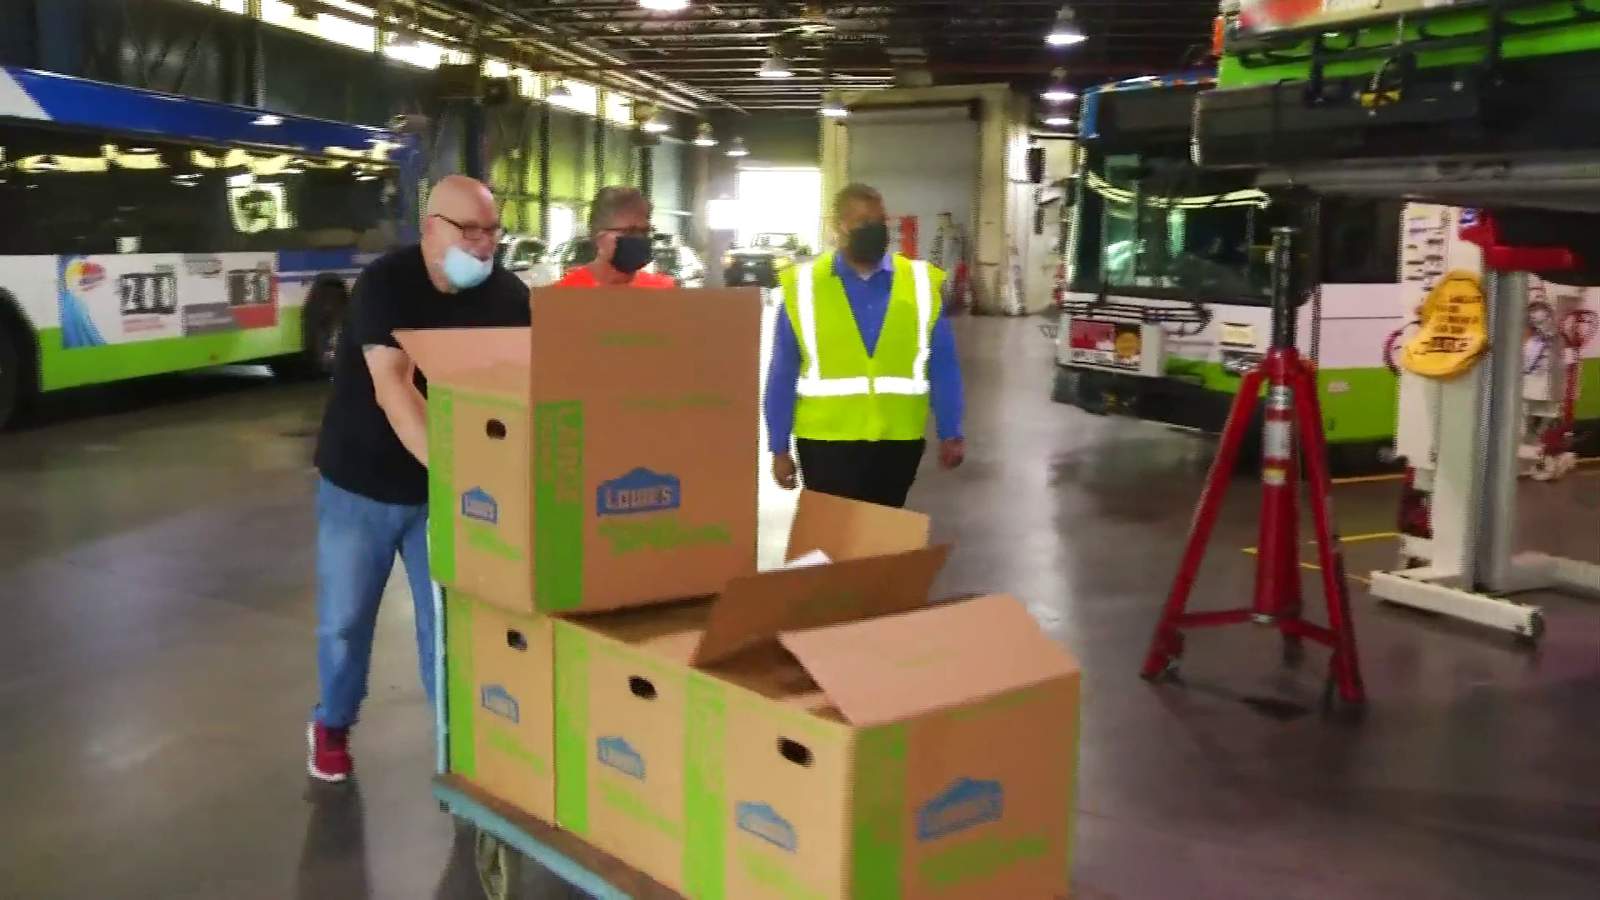 ‘It just really makes us feel good’: Valley Metro employees treated to lunch thanks to Food for Frontline